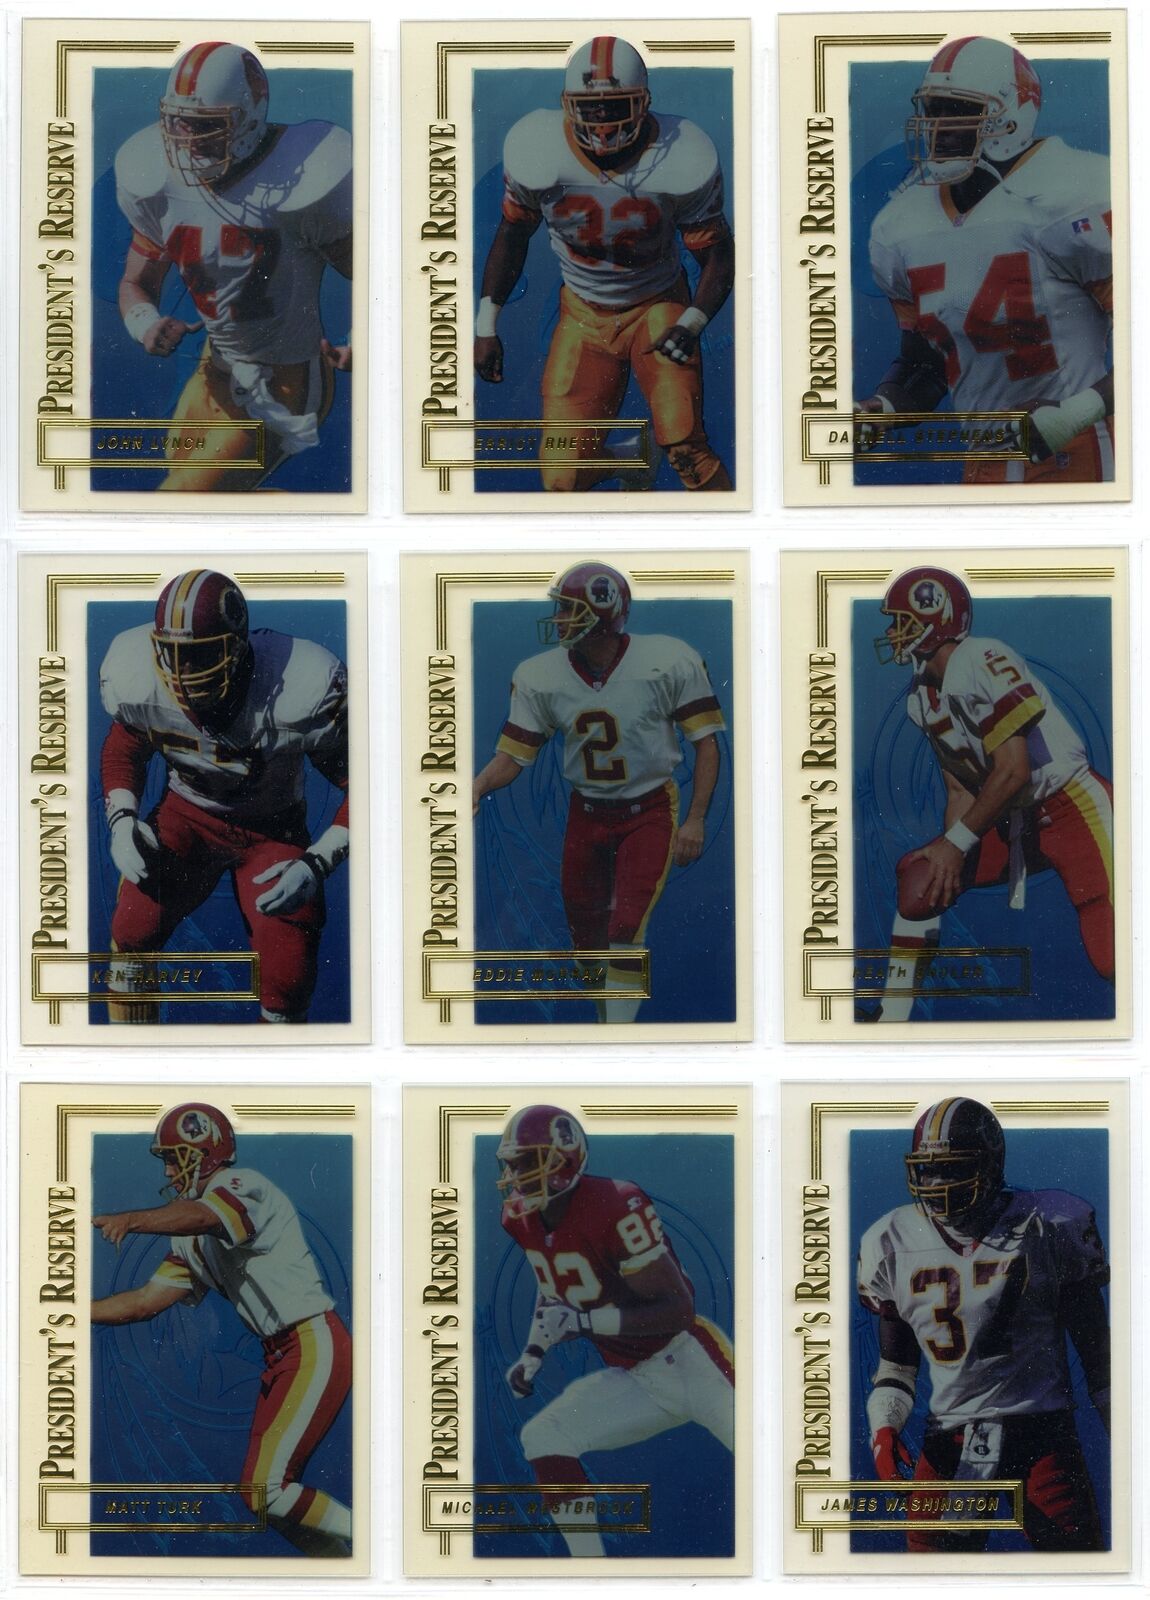 1996 CE PRESIDENT'S RESERVE NFL football complete set of 400 cards Image 2